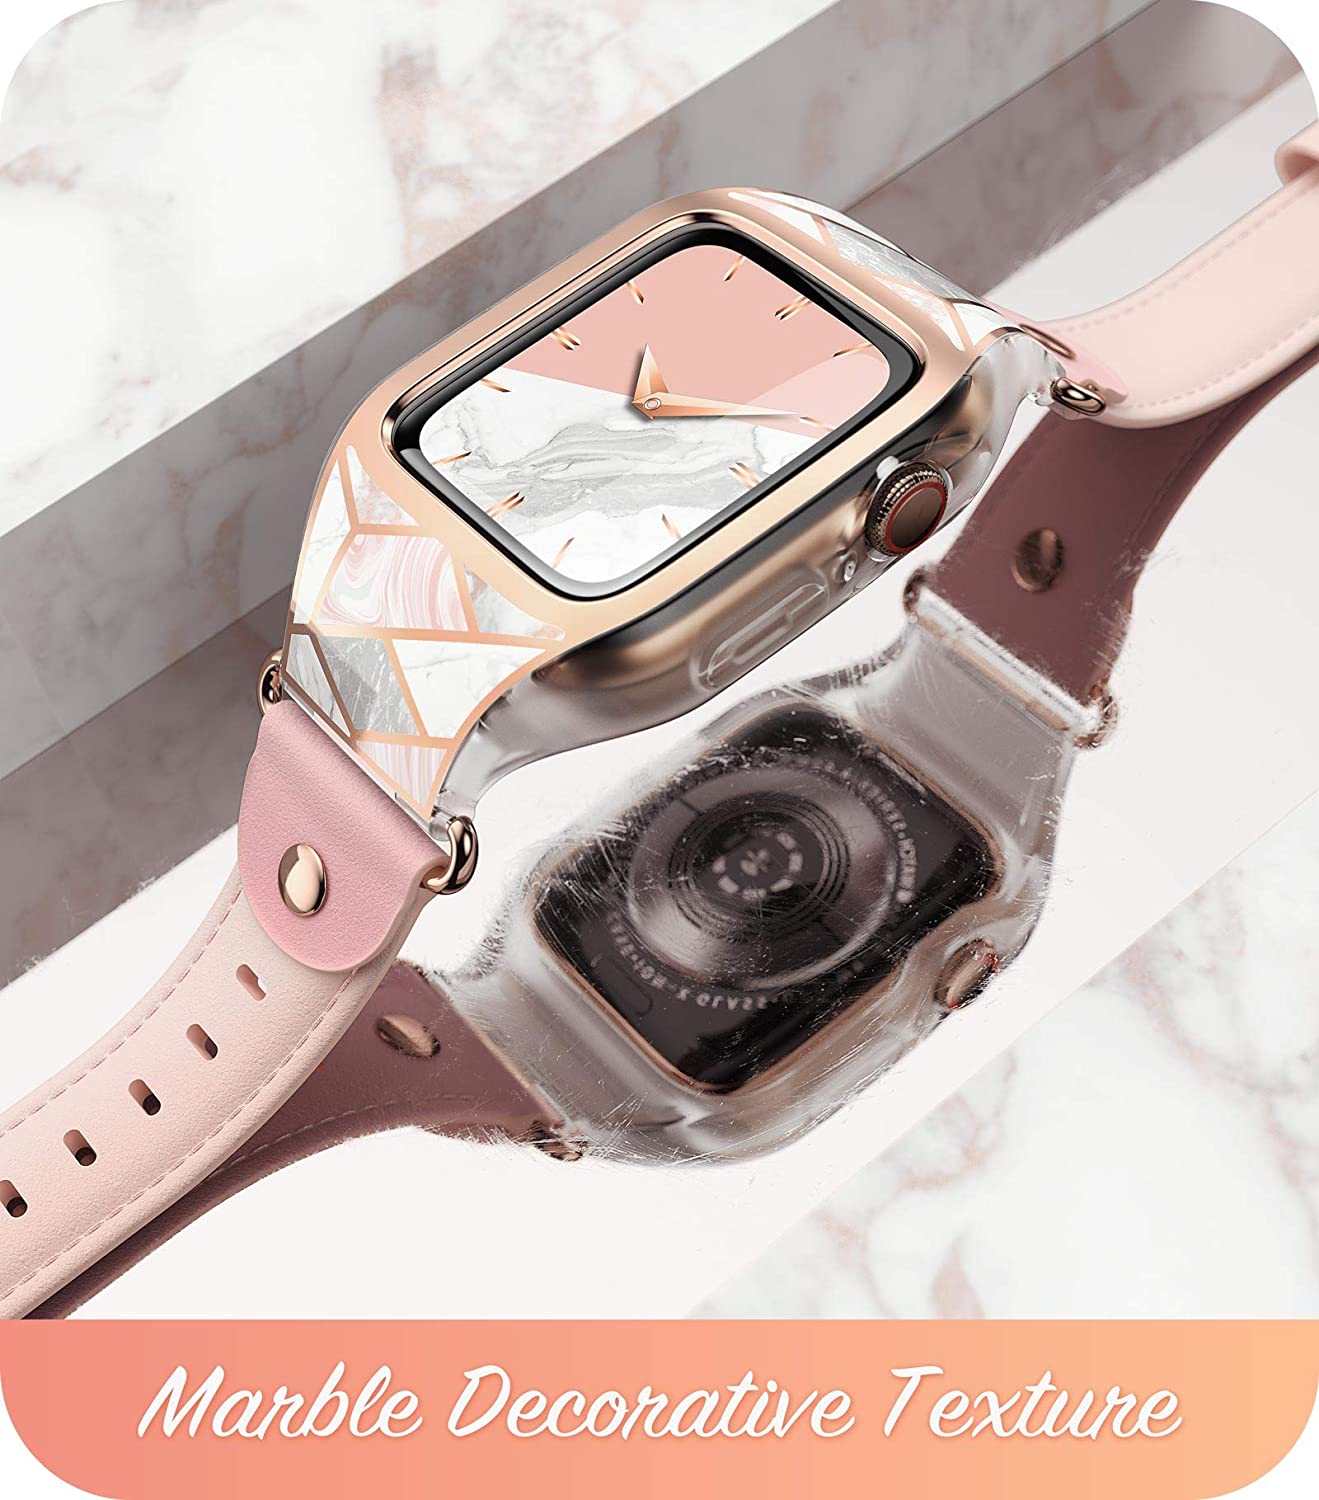 i-Blason Cosmo Apple Watch Band Series 6 / SE / 5 /4 [40mm], Stylish Sporty Protective Bumper Case with Adjustable Strap Bands